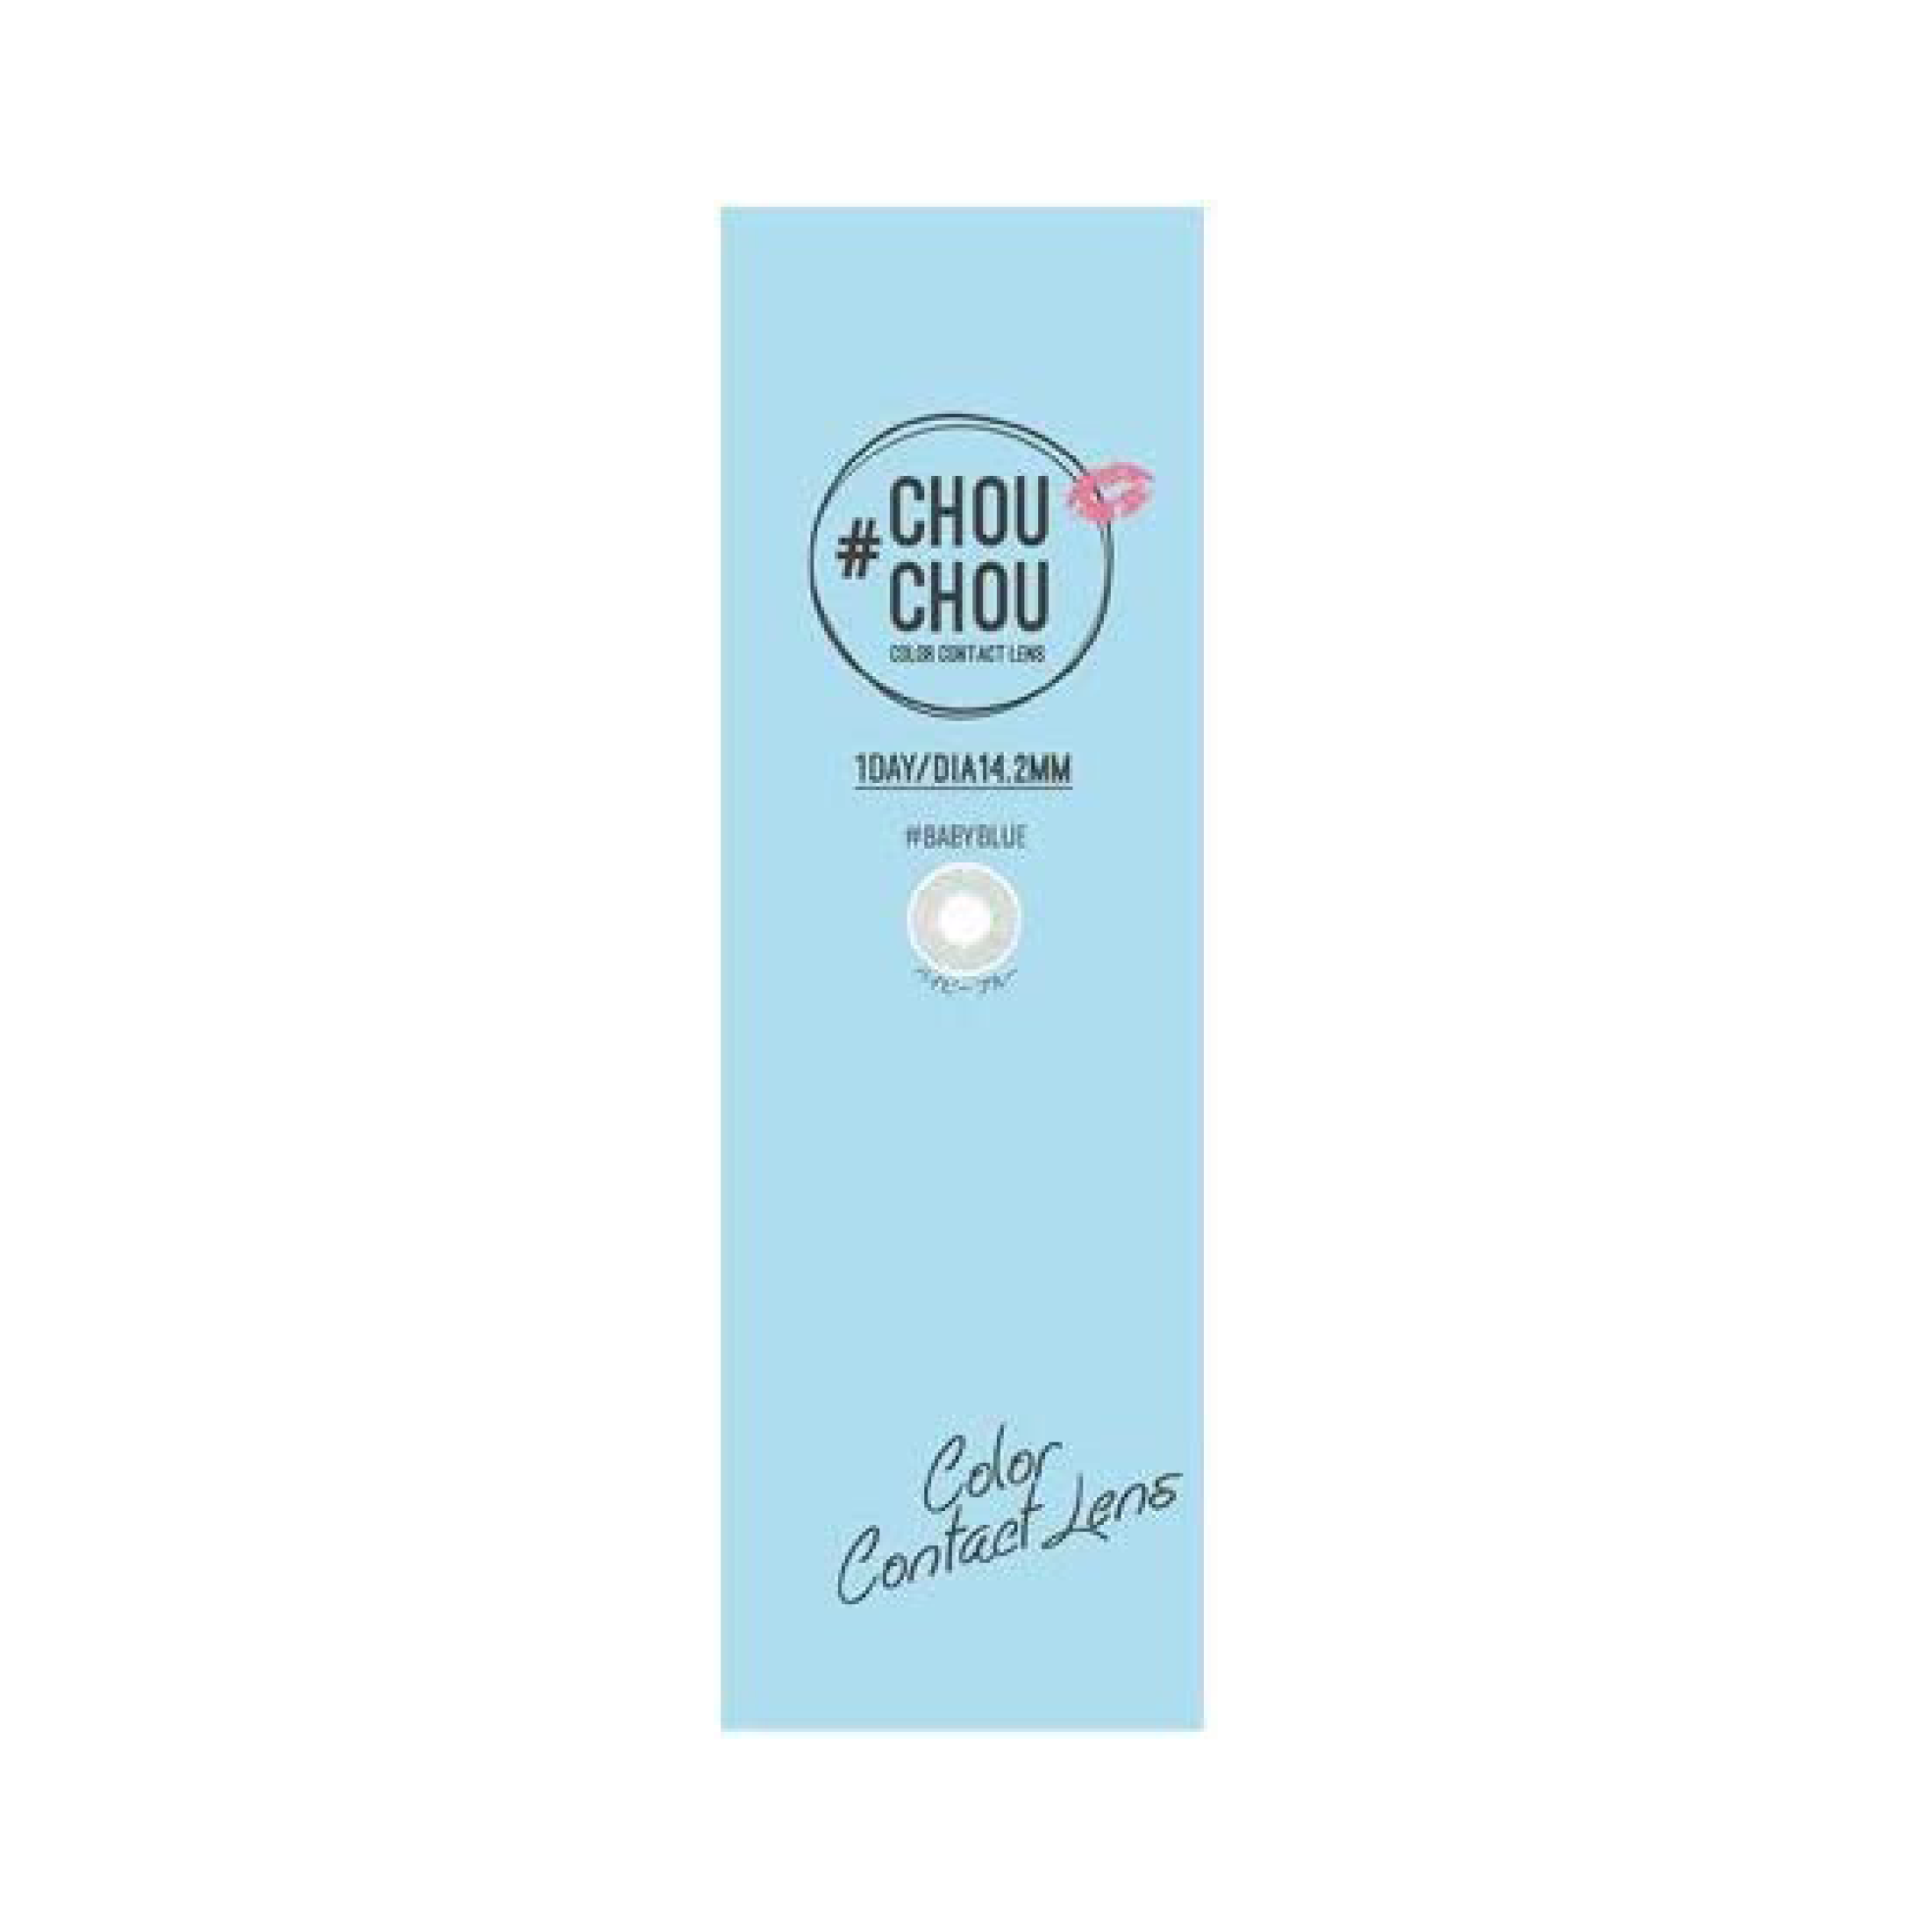 Chouchou 1-Day color contact lens #Baby blue日抛美瞳婴儿蓝｜10 Pcs